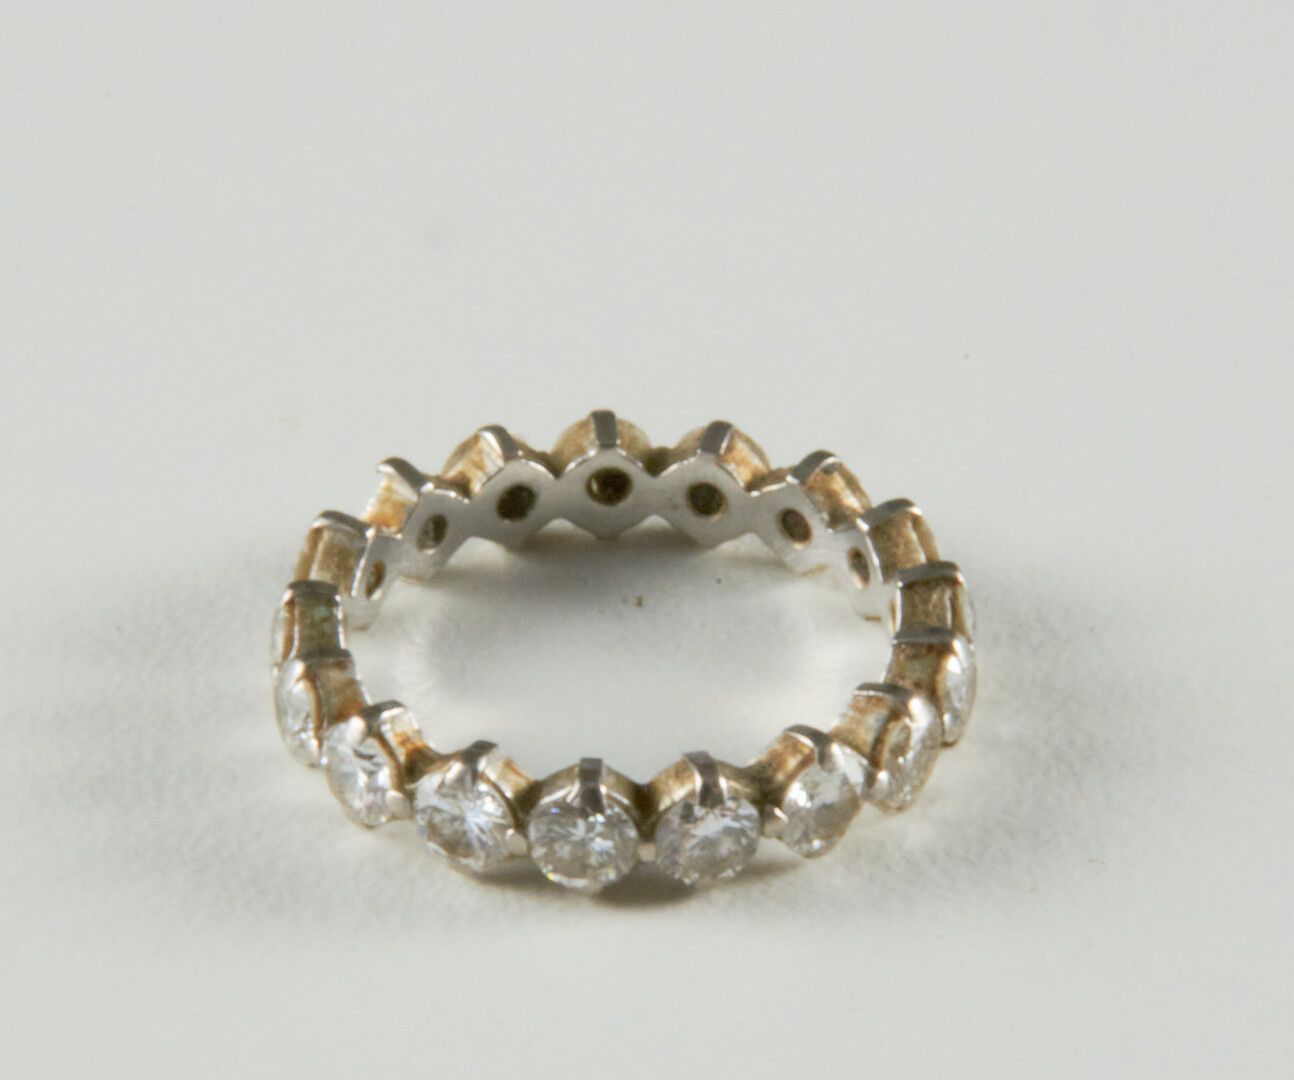 Null An American wedding ring - weight : 2g (one diamond missing)